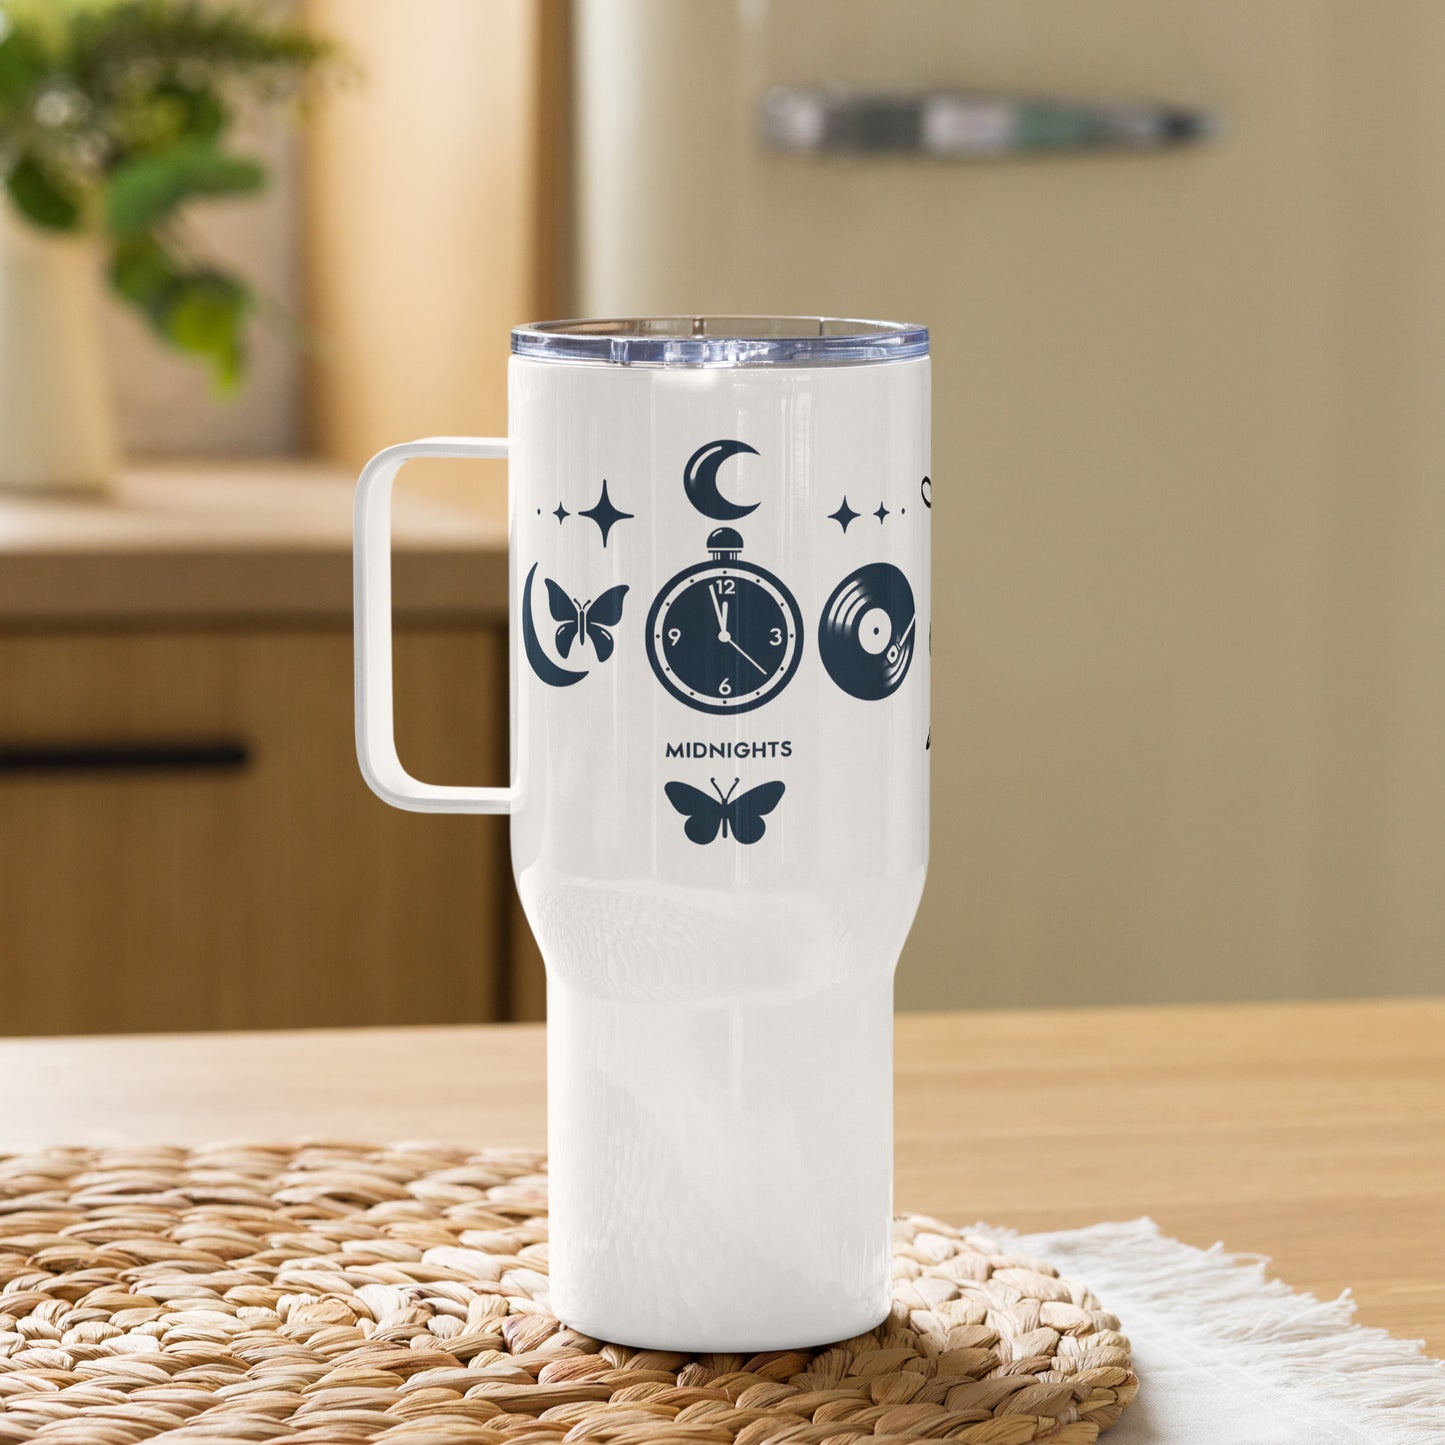 Karma Cat - Taylor Swift 'Midnights' Inspired Travel Mug with Handle - Music Era Collectible & Gift